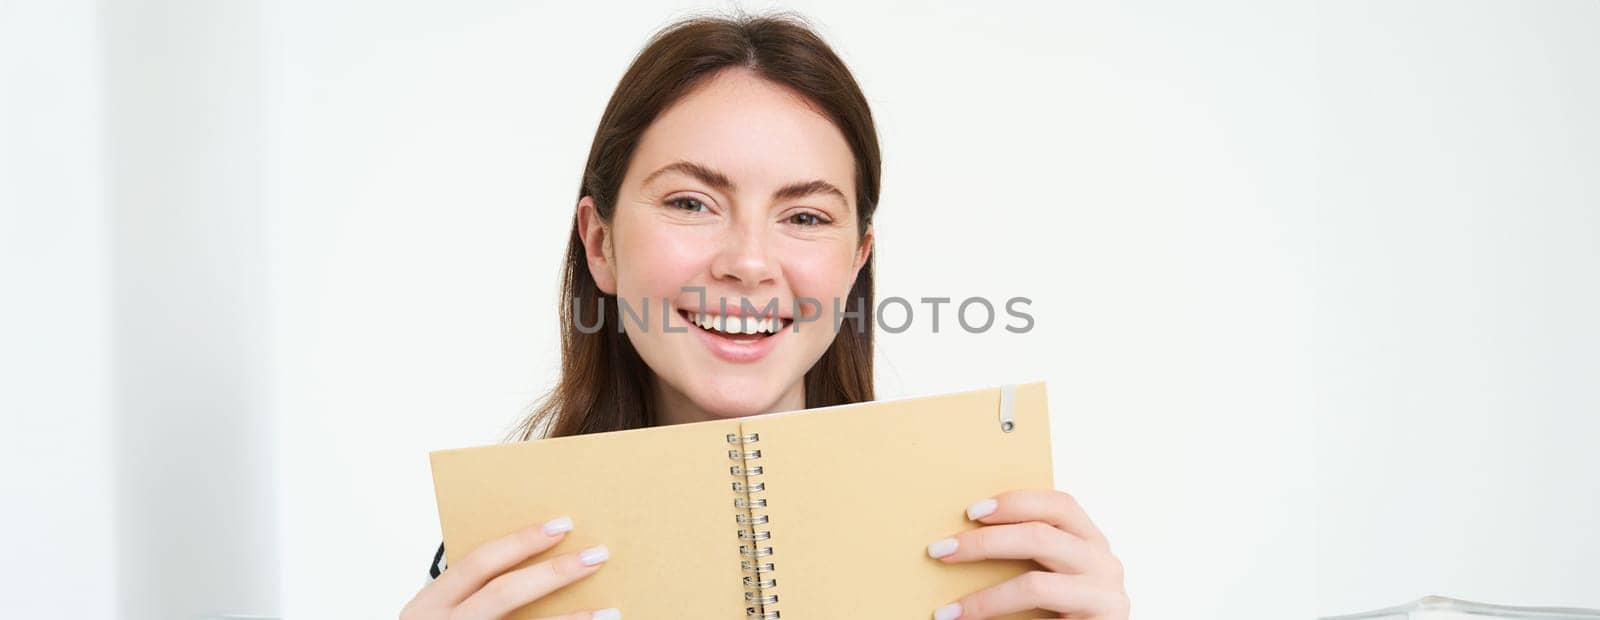 Portrait of happy woman smiling, showing her book, daily planner, holding notebook, planning her trip an writing notes in organizer, isolated against white background.